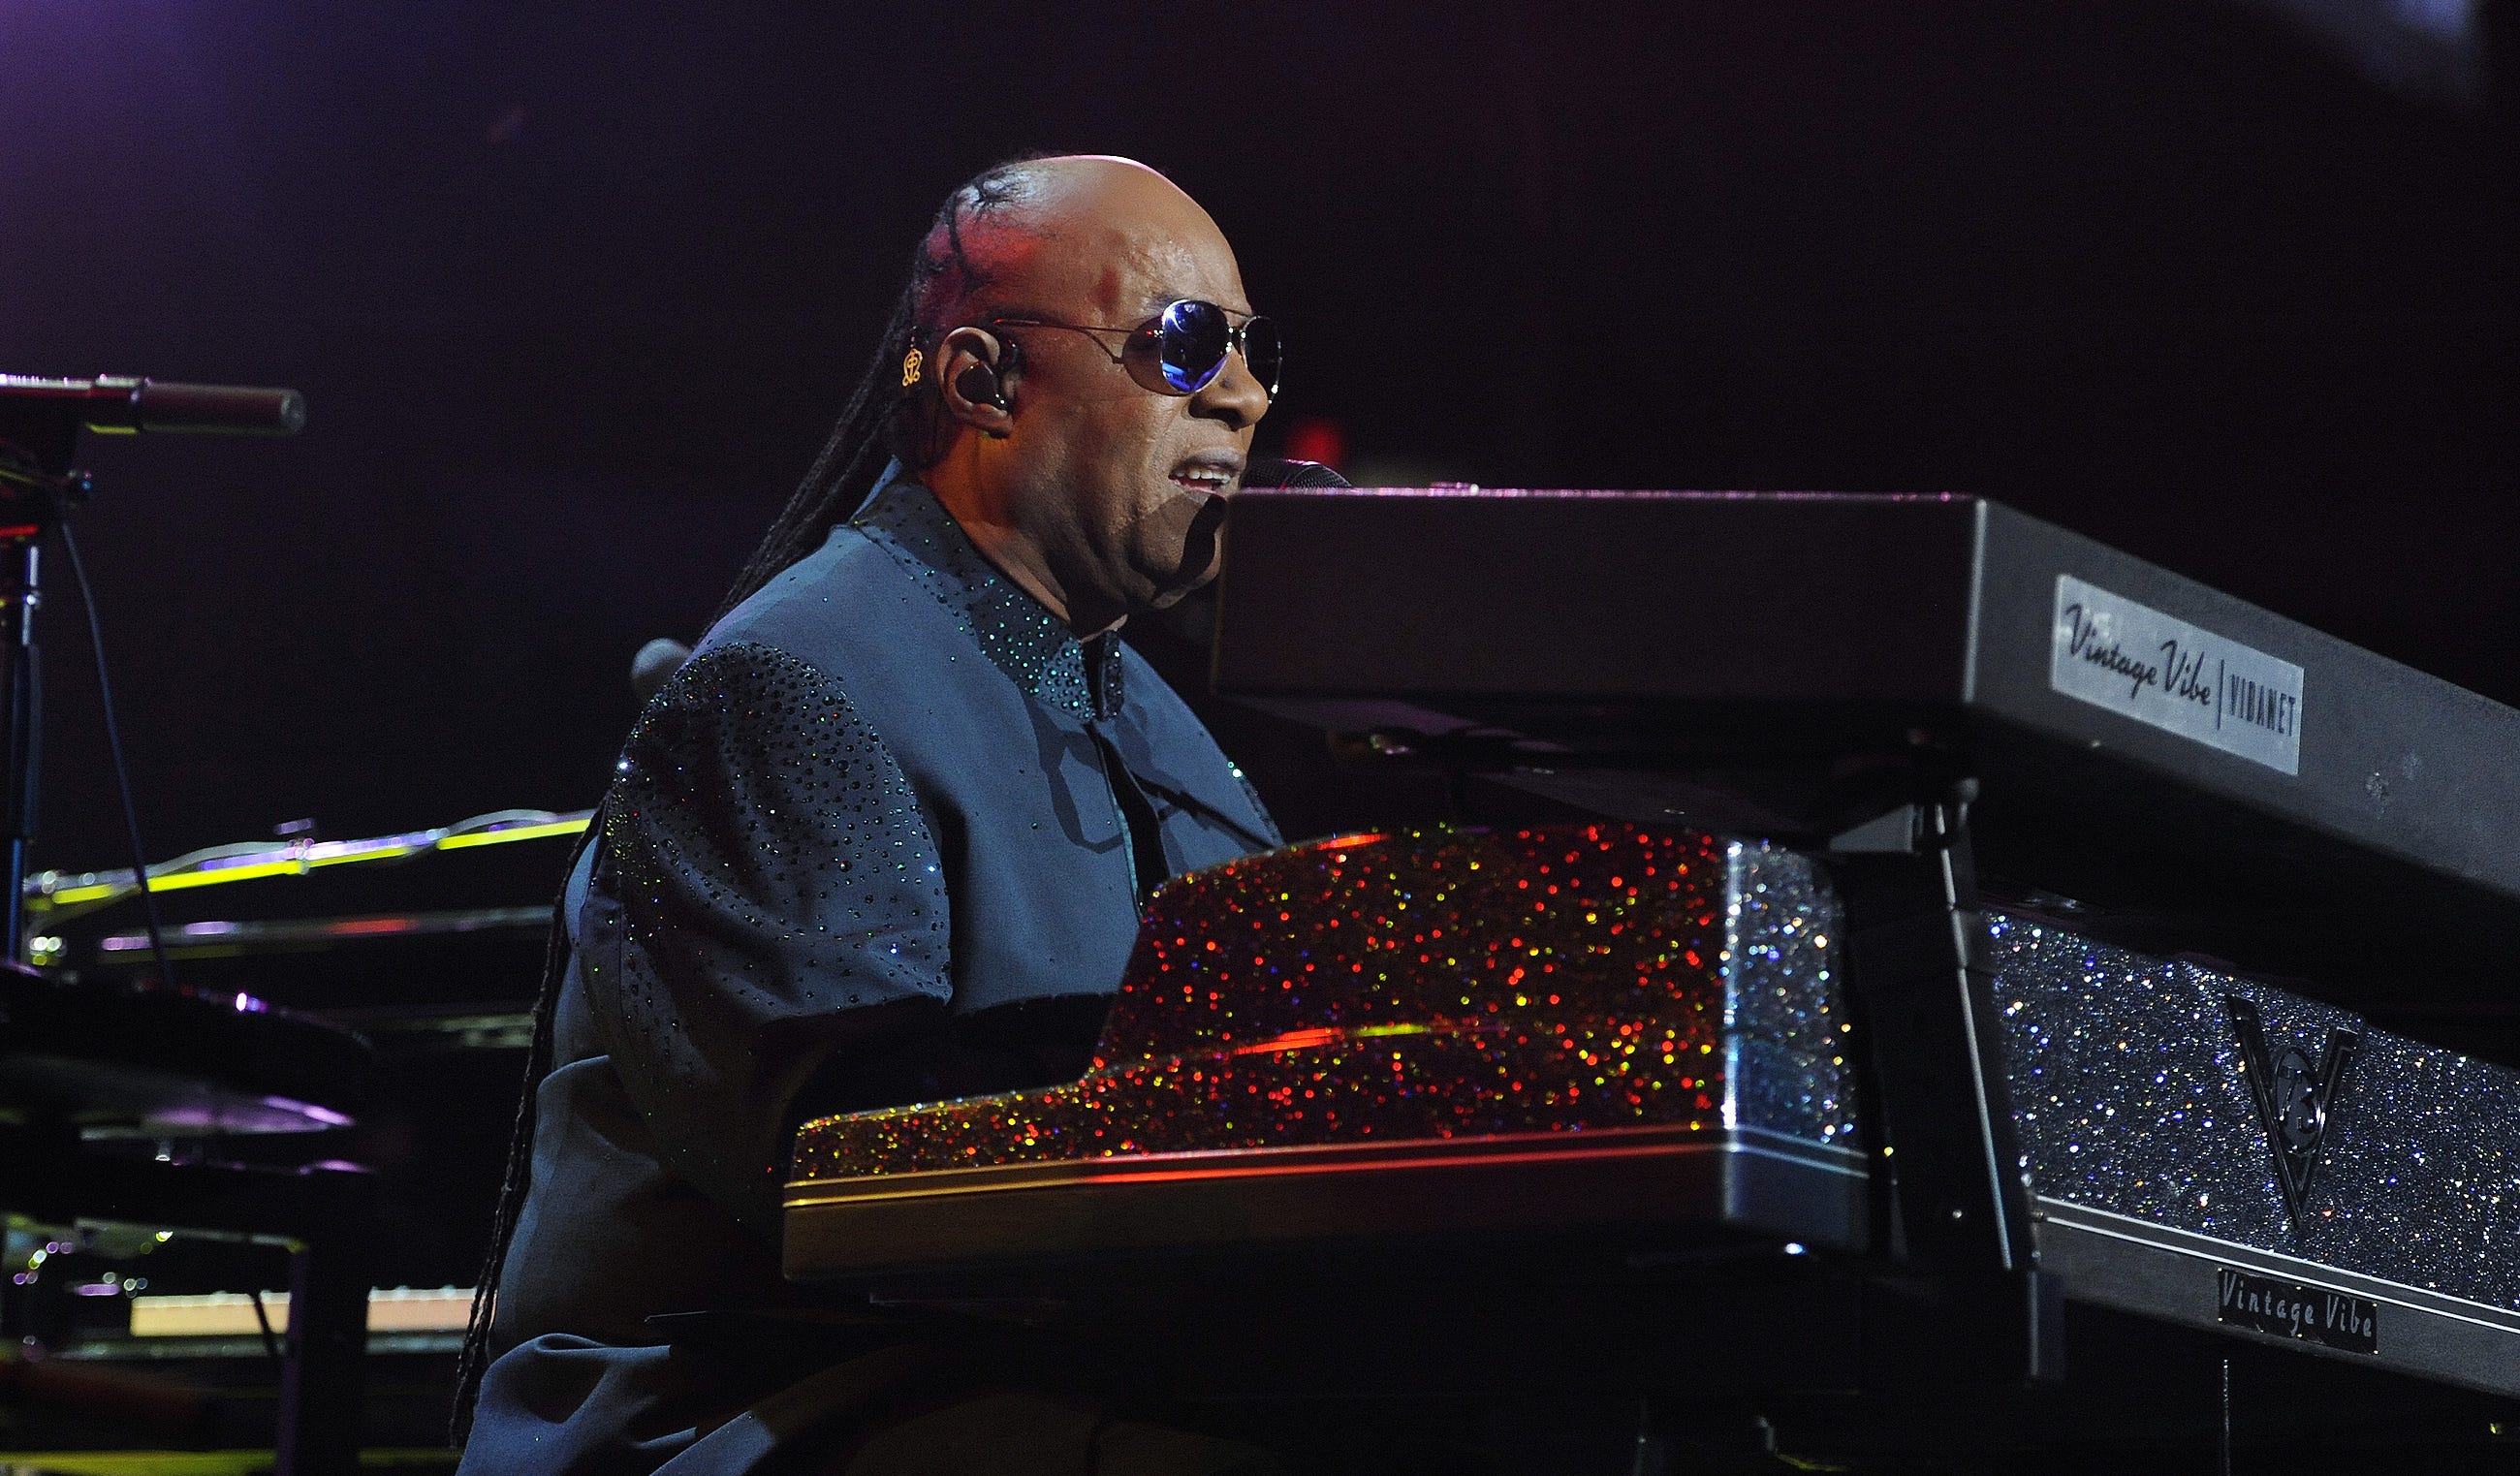 Stevie Wonder performs Love's In Need Of Love Today for the crowd during his concert at Joe Louis Arena.  Photo taken on Saturday, Nov. 21, 2015 in Detroit, Mich.  (Jose Juarez/Special to The Detroit News)